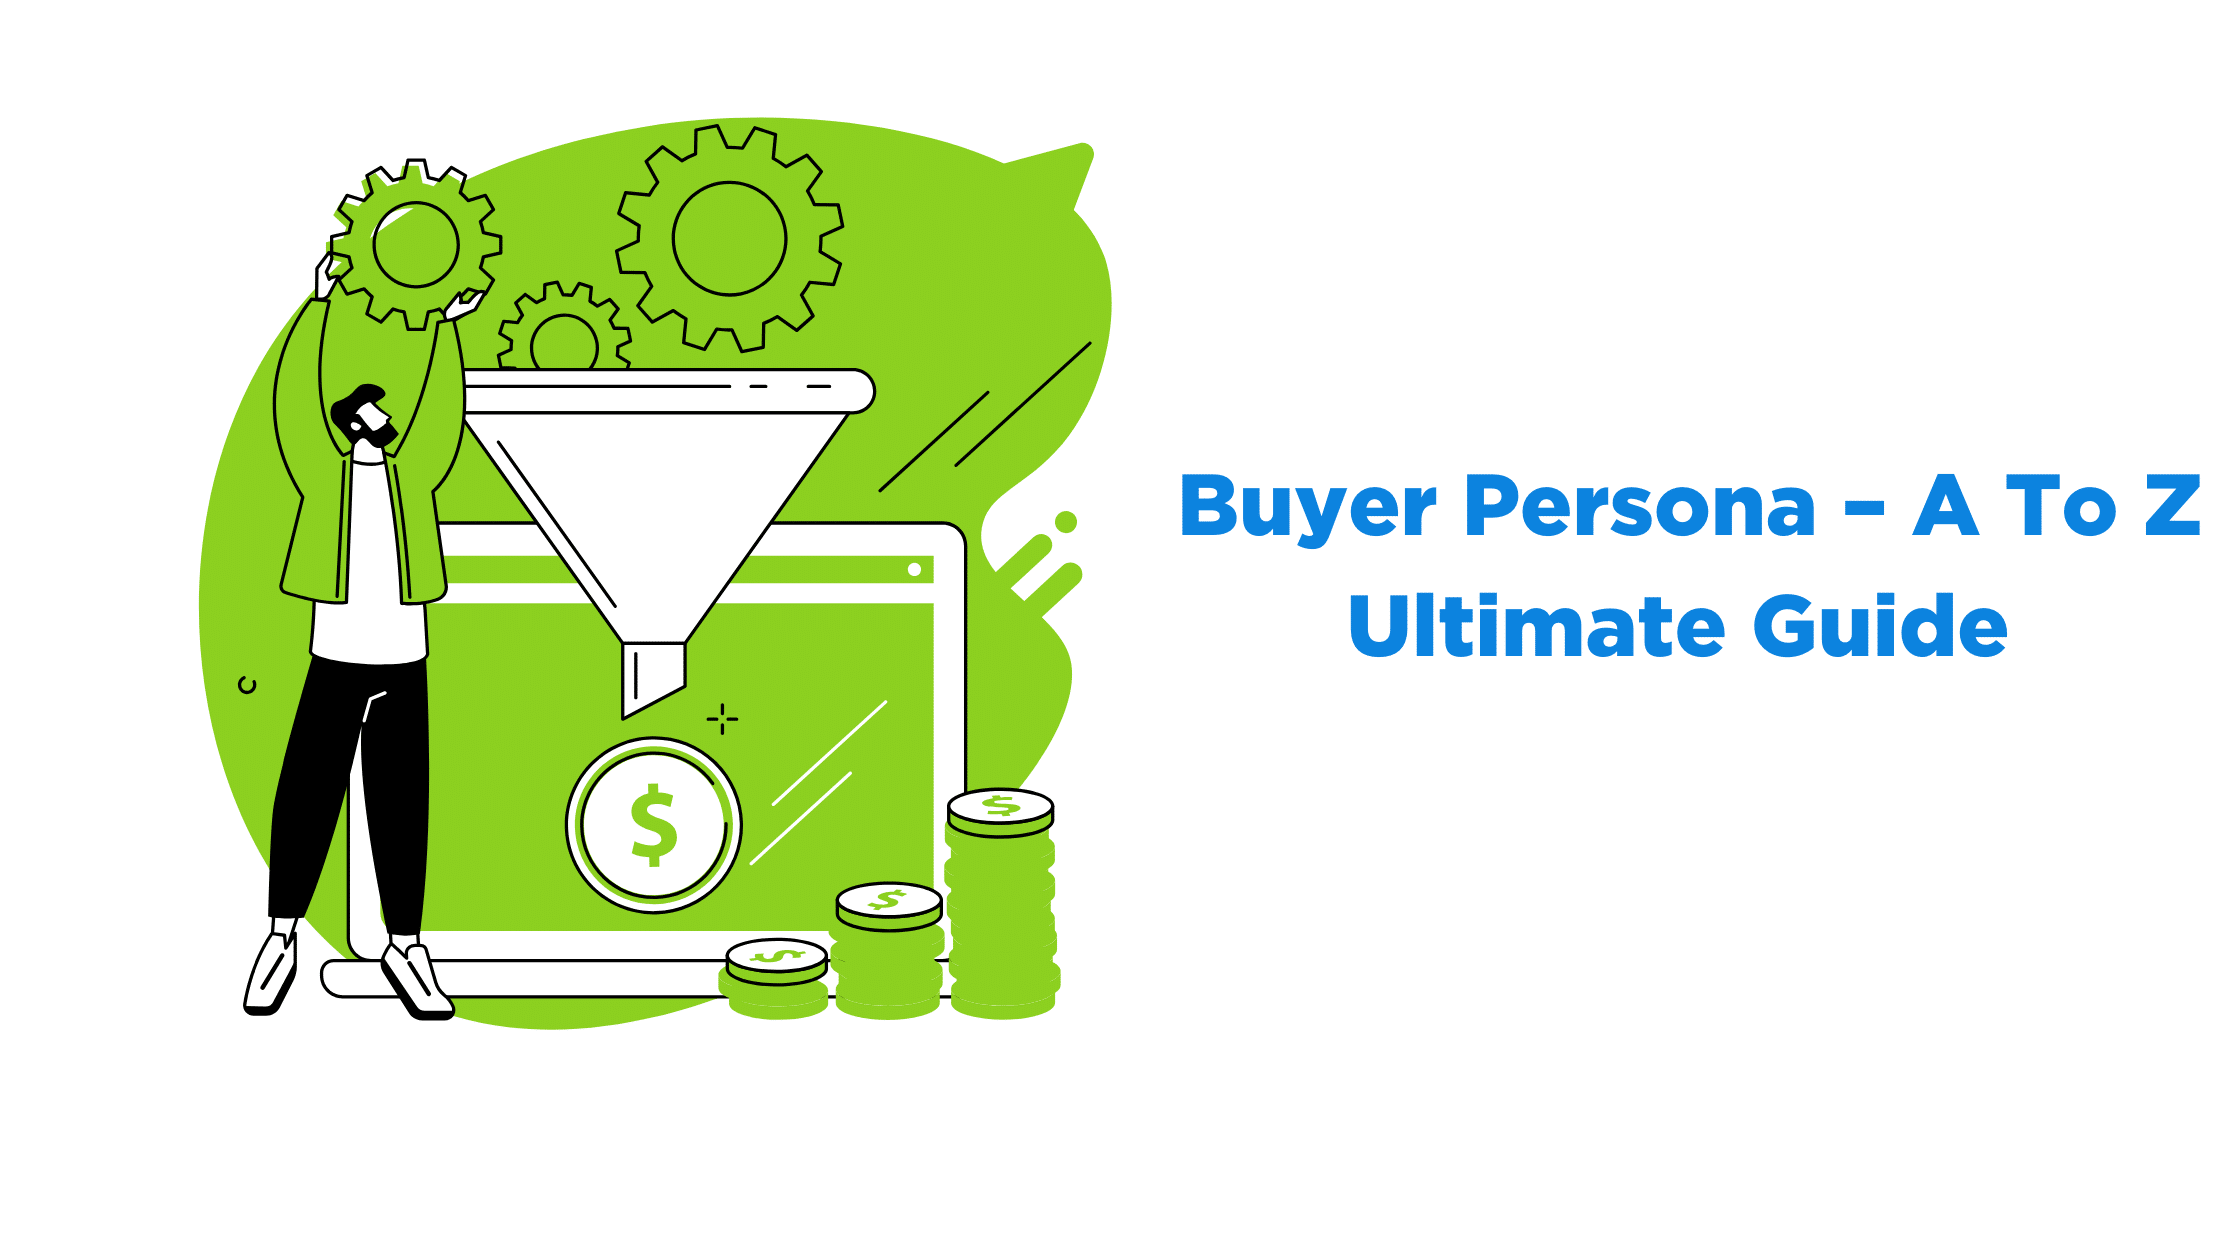 Buyer Persona – A To Z Ultimate Guide